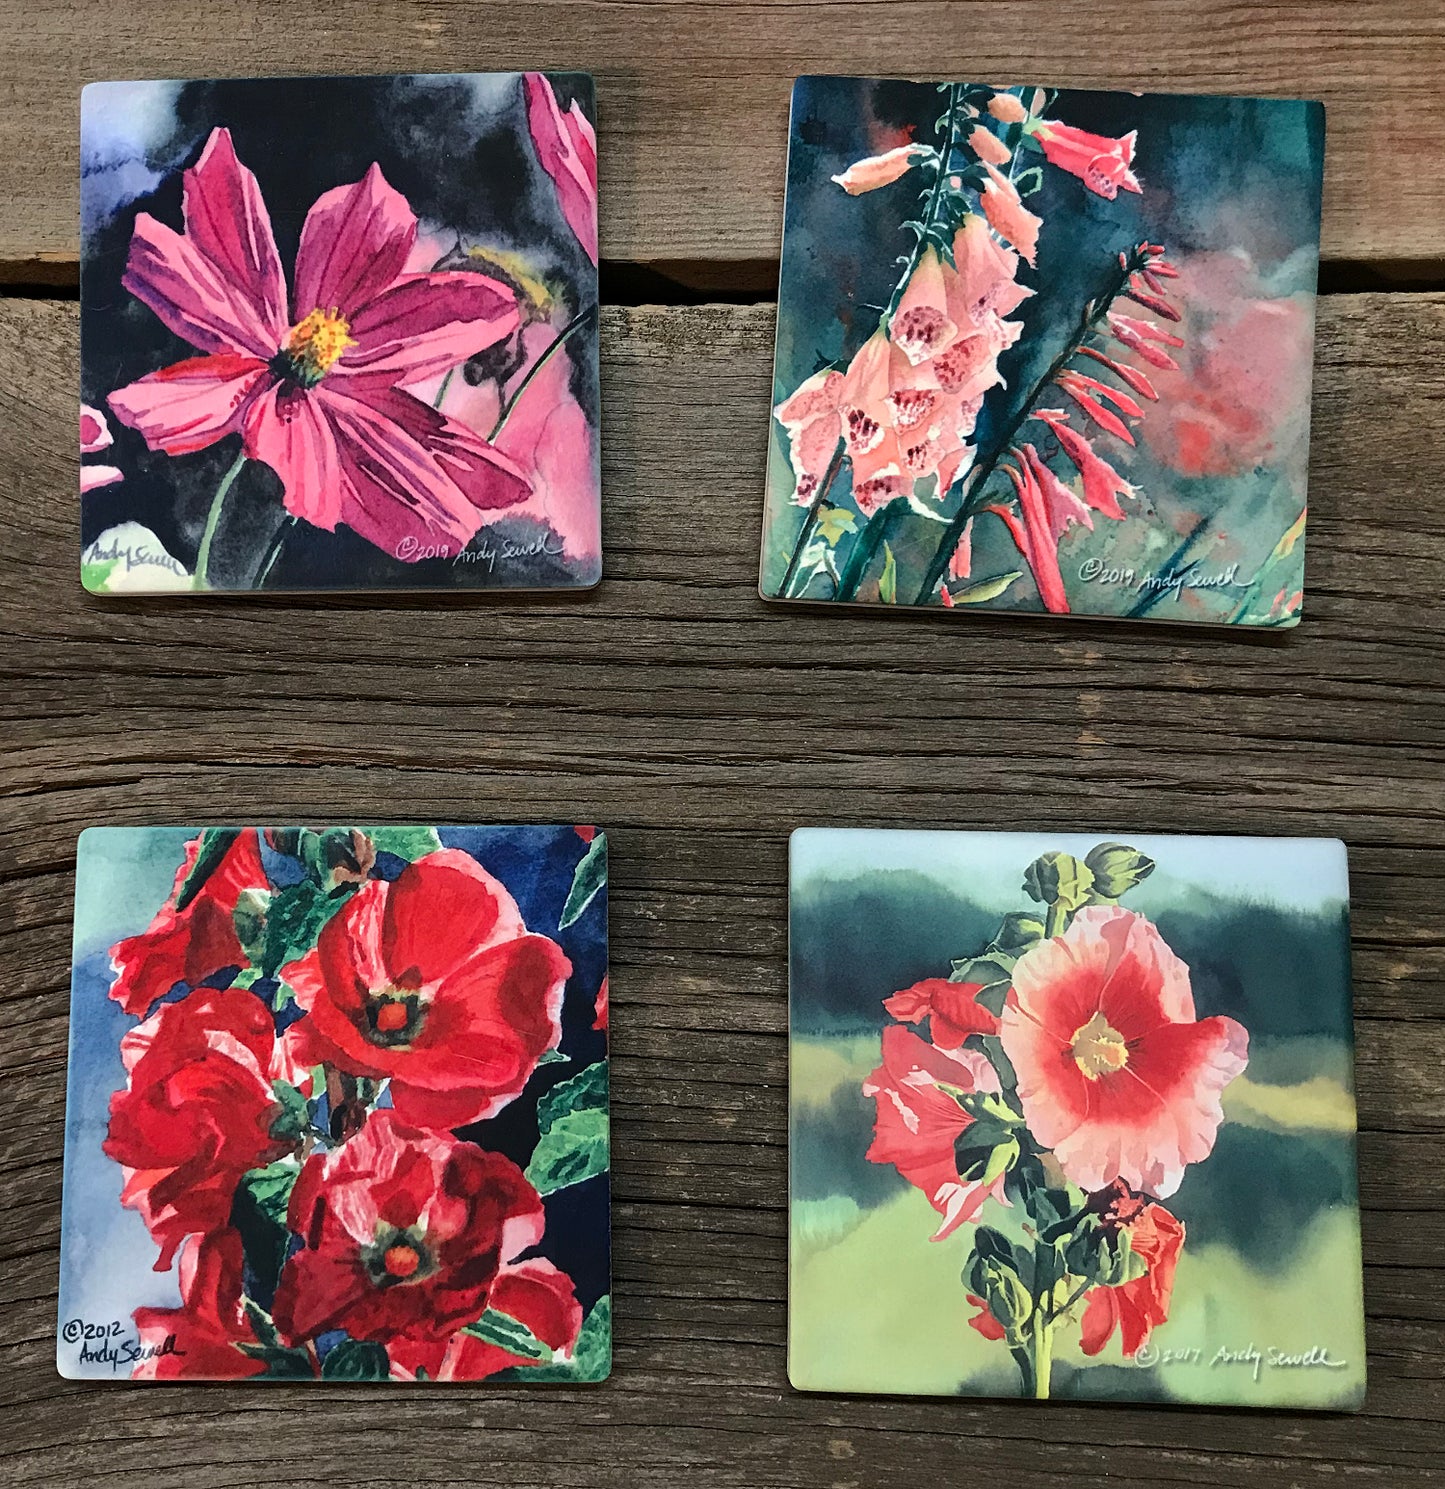 "Garden Flowers" themed coaster sets: 3 options, see below.